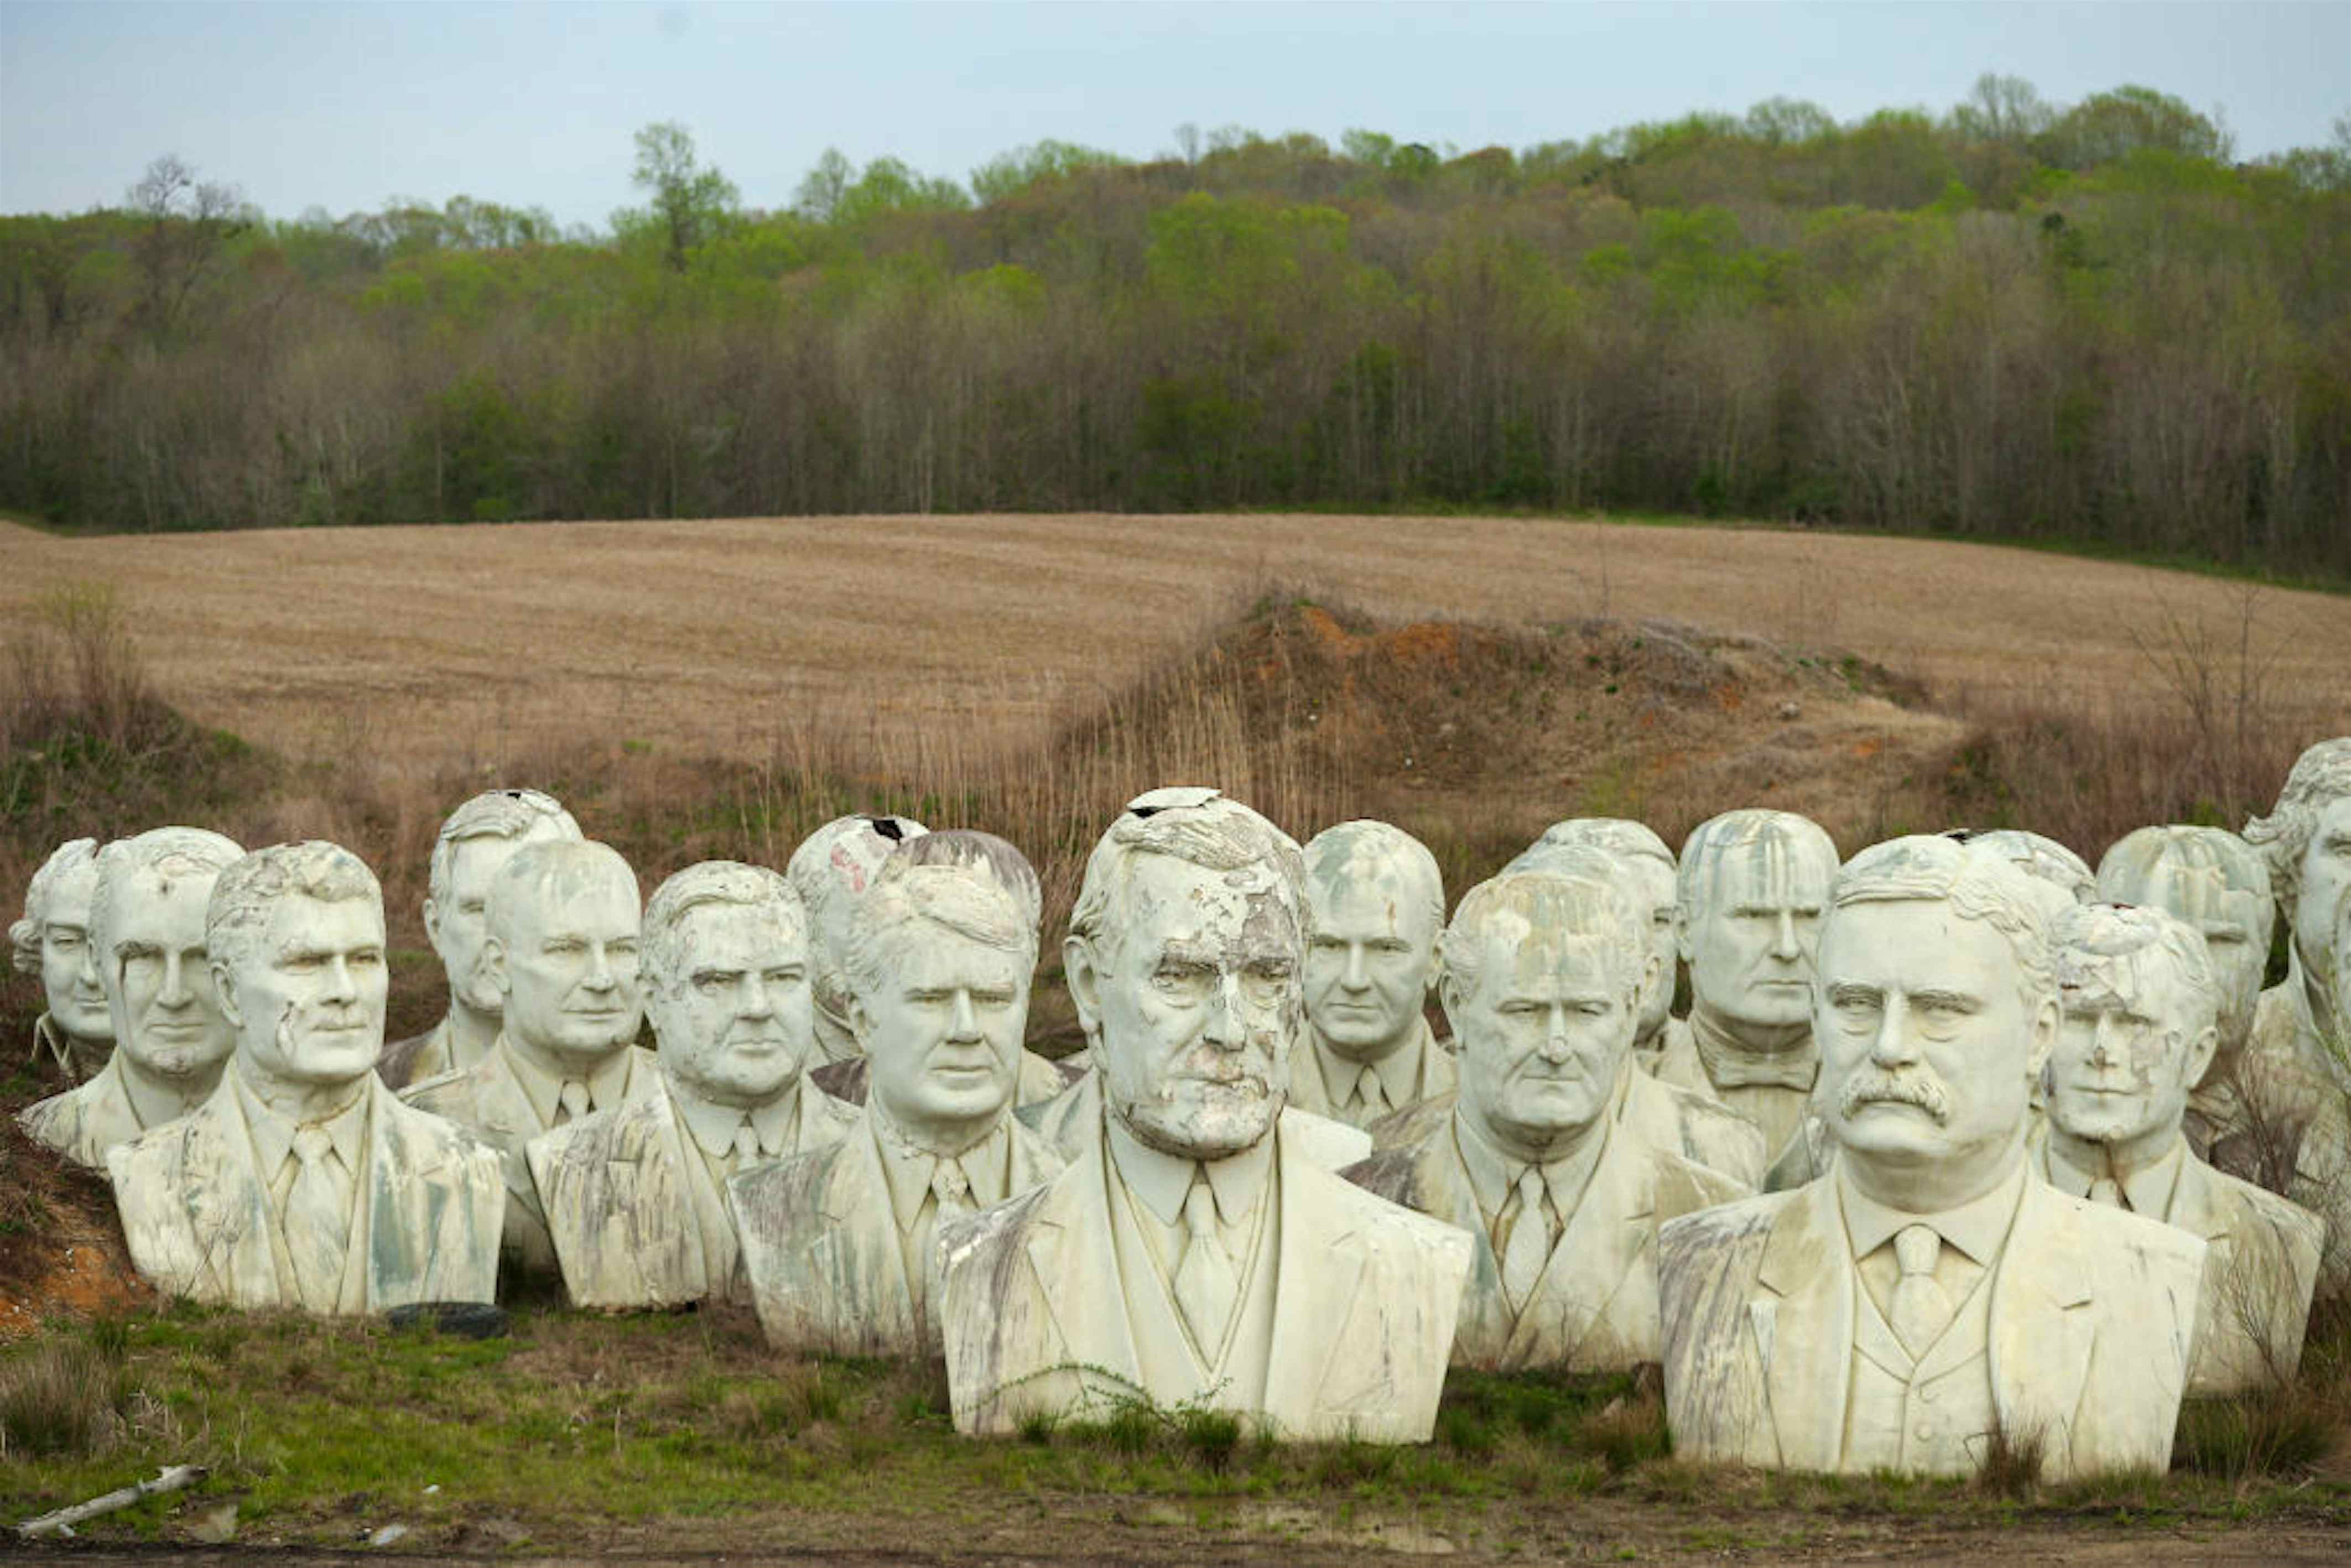 Take a night-time tour of Presidents Heads in Virginia